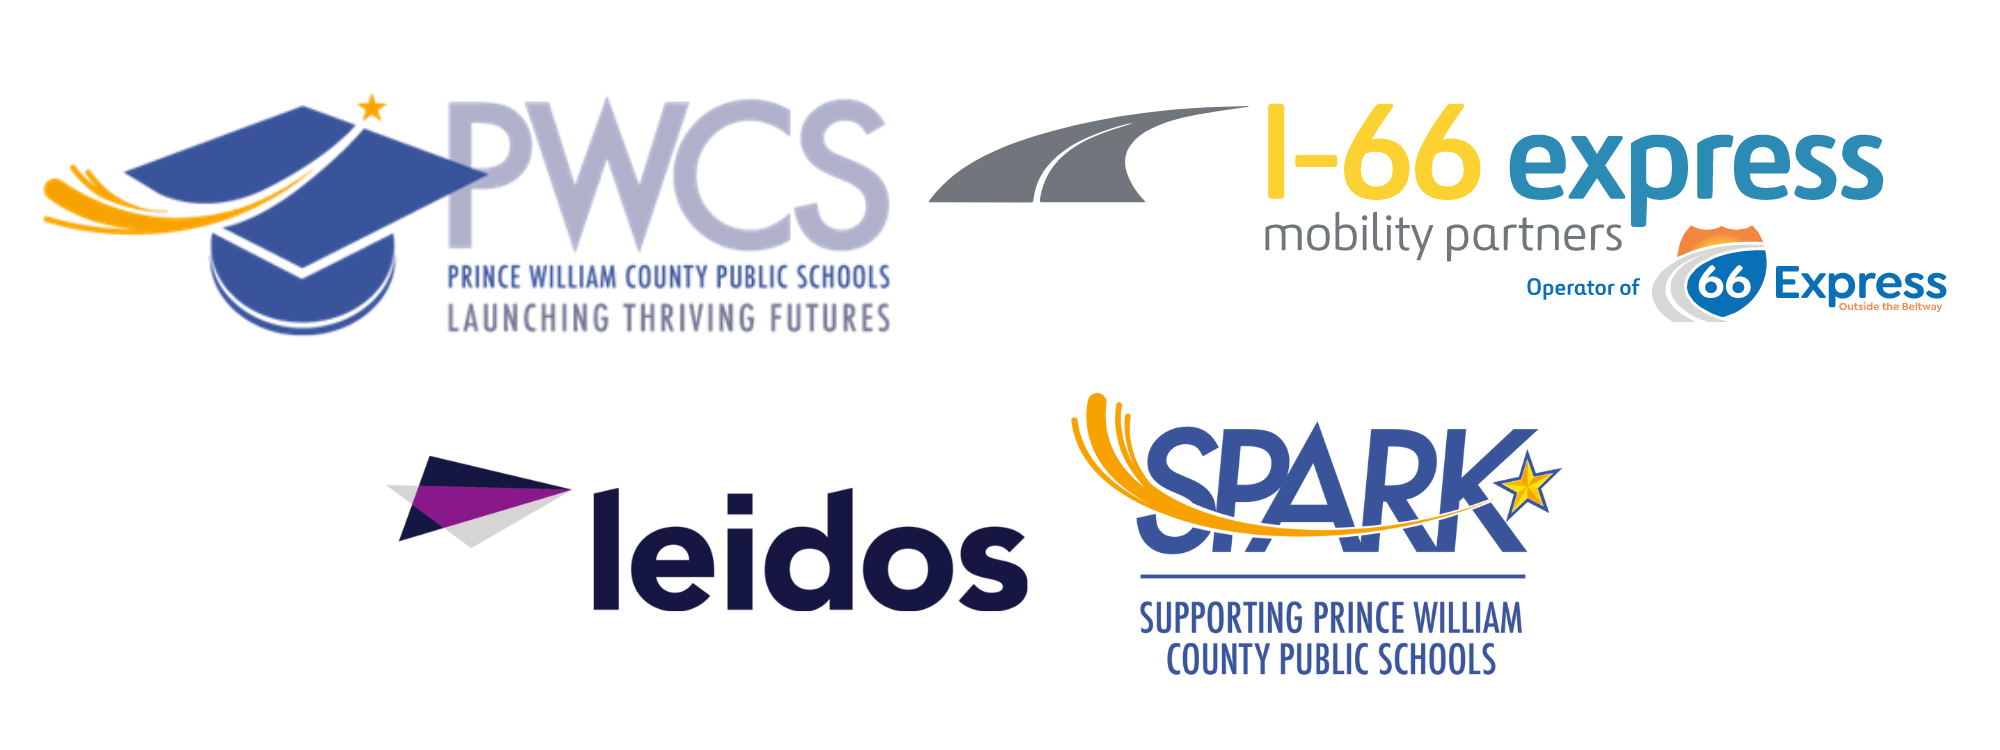 Fair Sponsors Include PWCS, 1-66 Mobility Partners, Spark, and Leidos